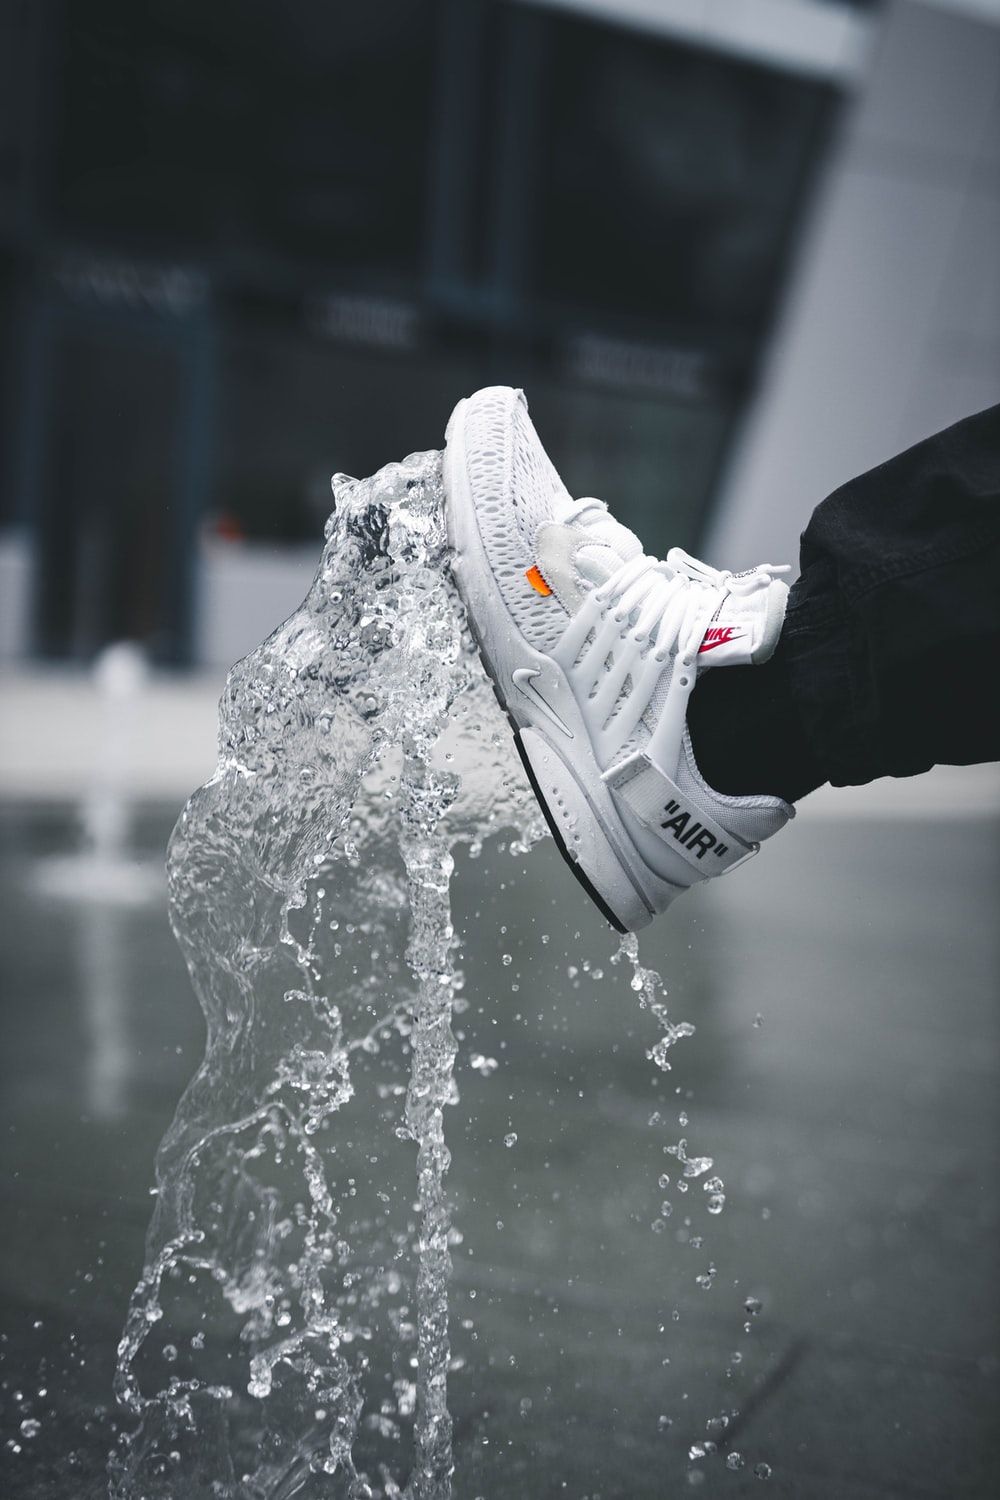 Off White Sneaker Picture. Download Free Image